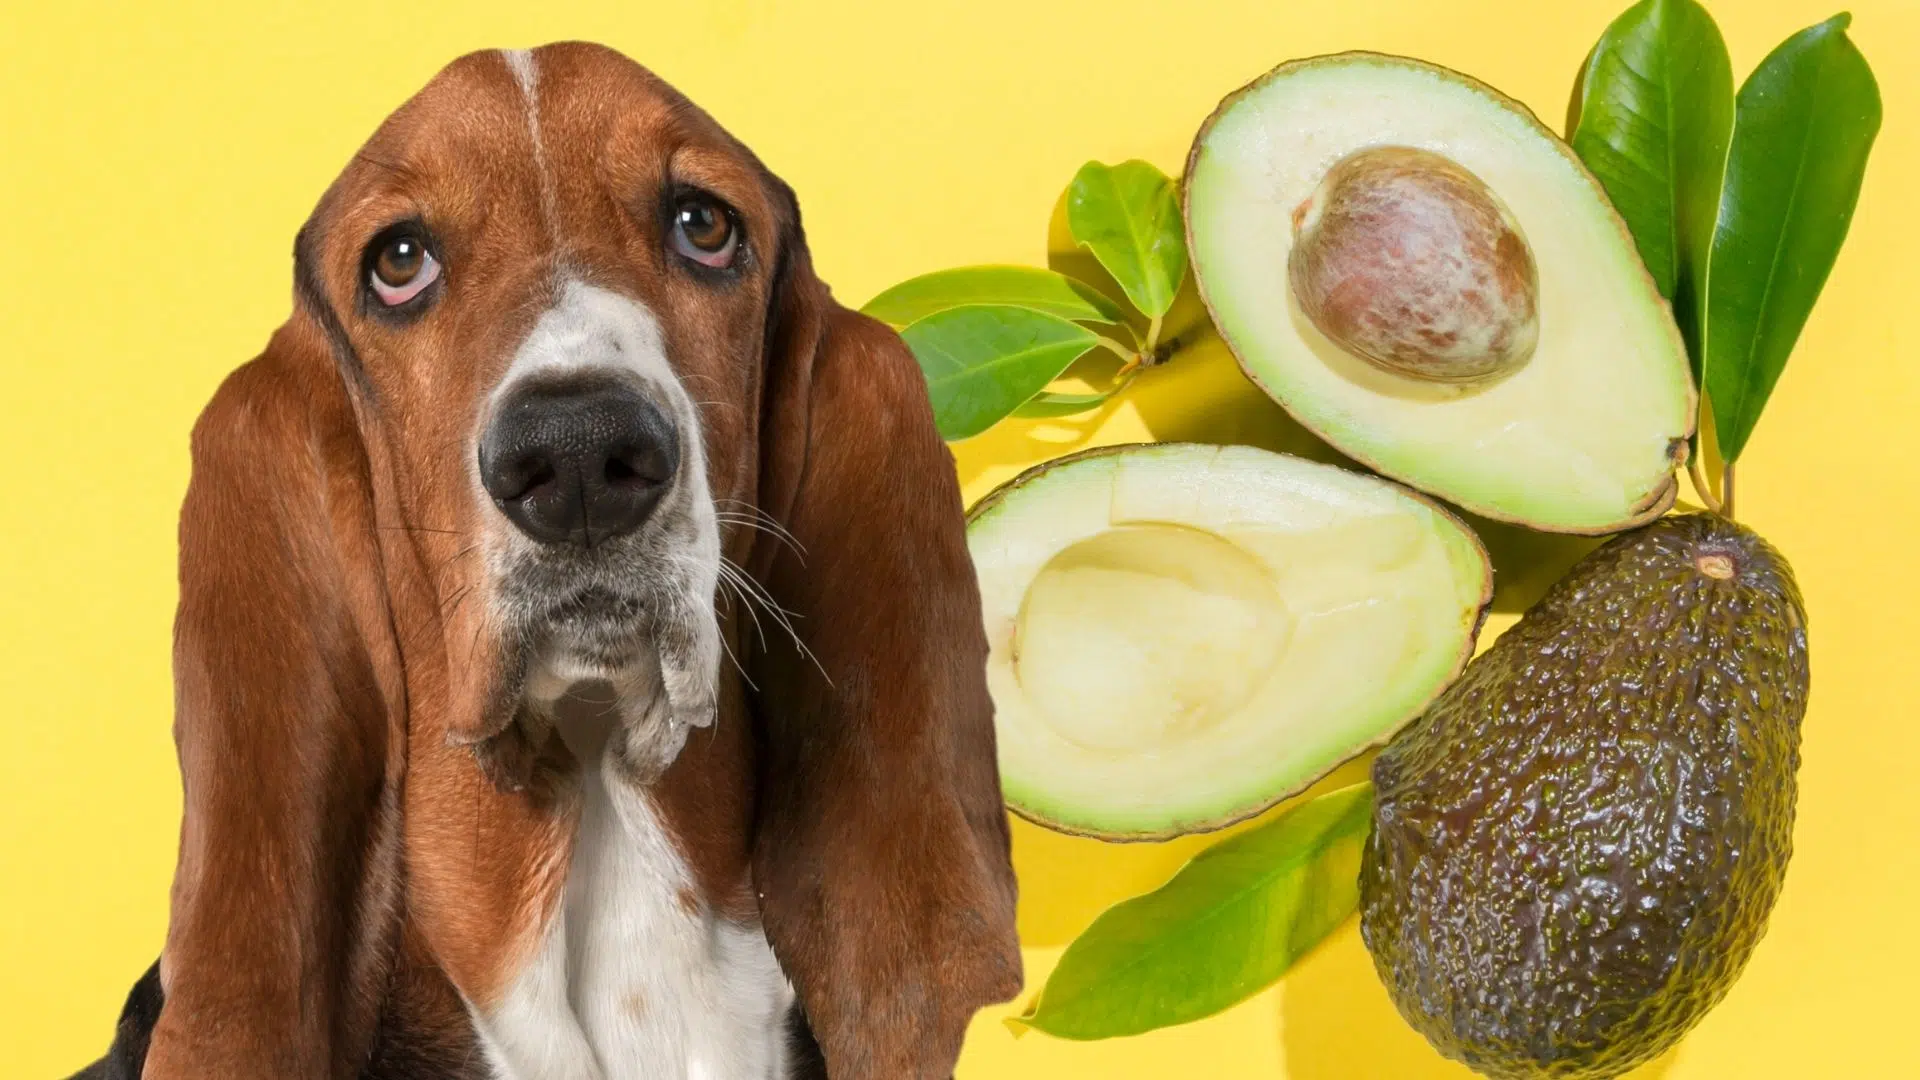 Can Dogs Eat Avocado? Our Vet Weighs In